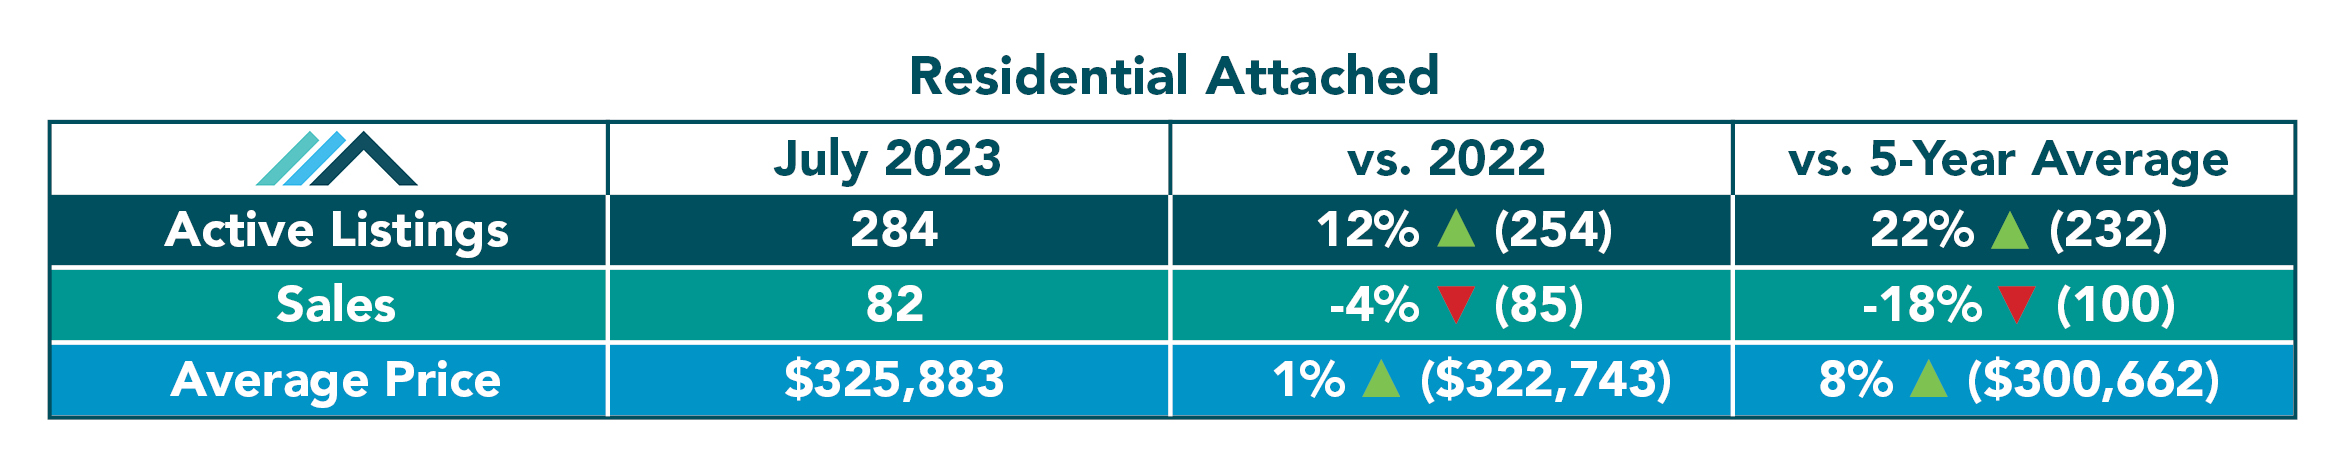 Residential Attached Tables July 2023